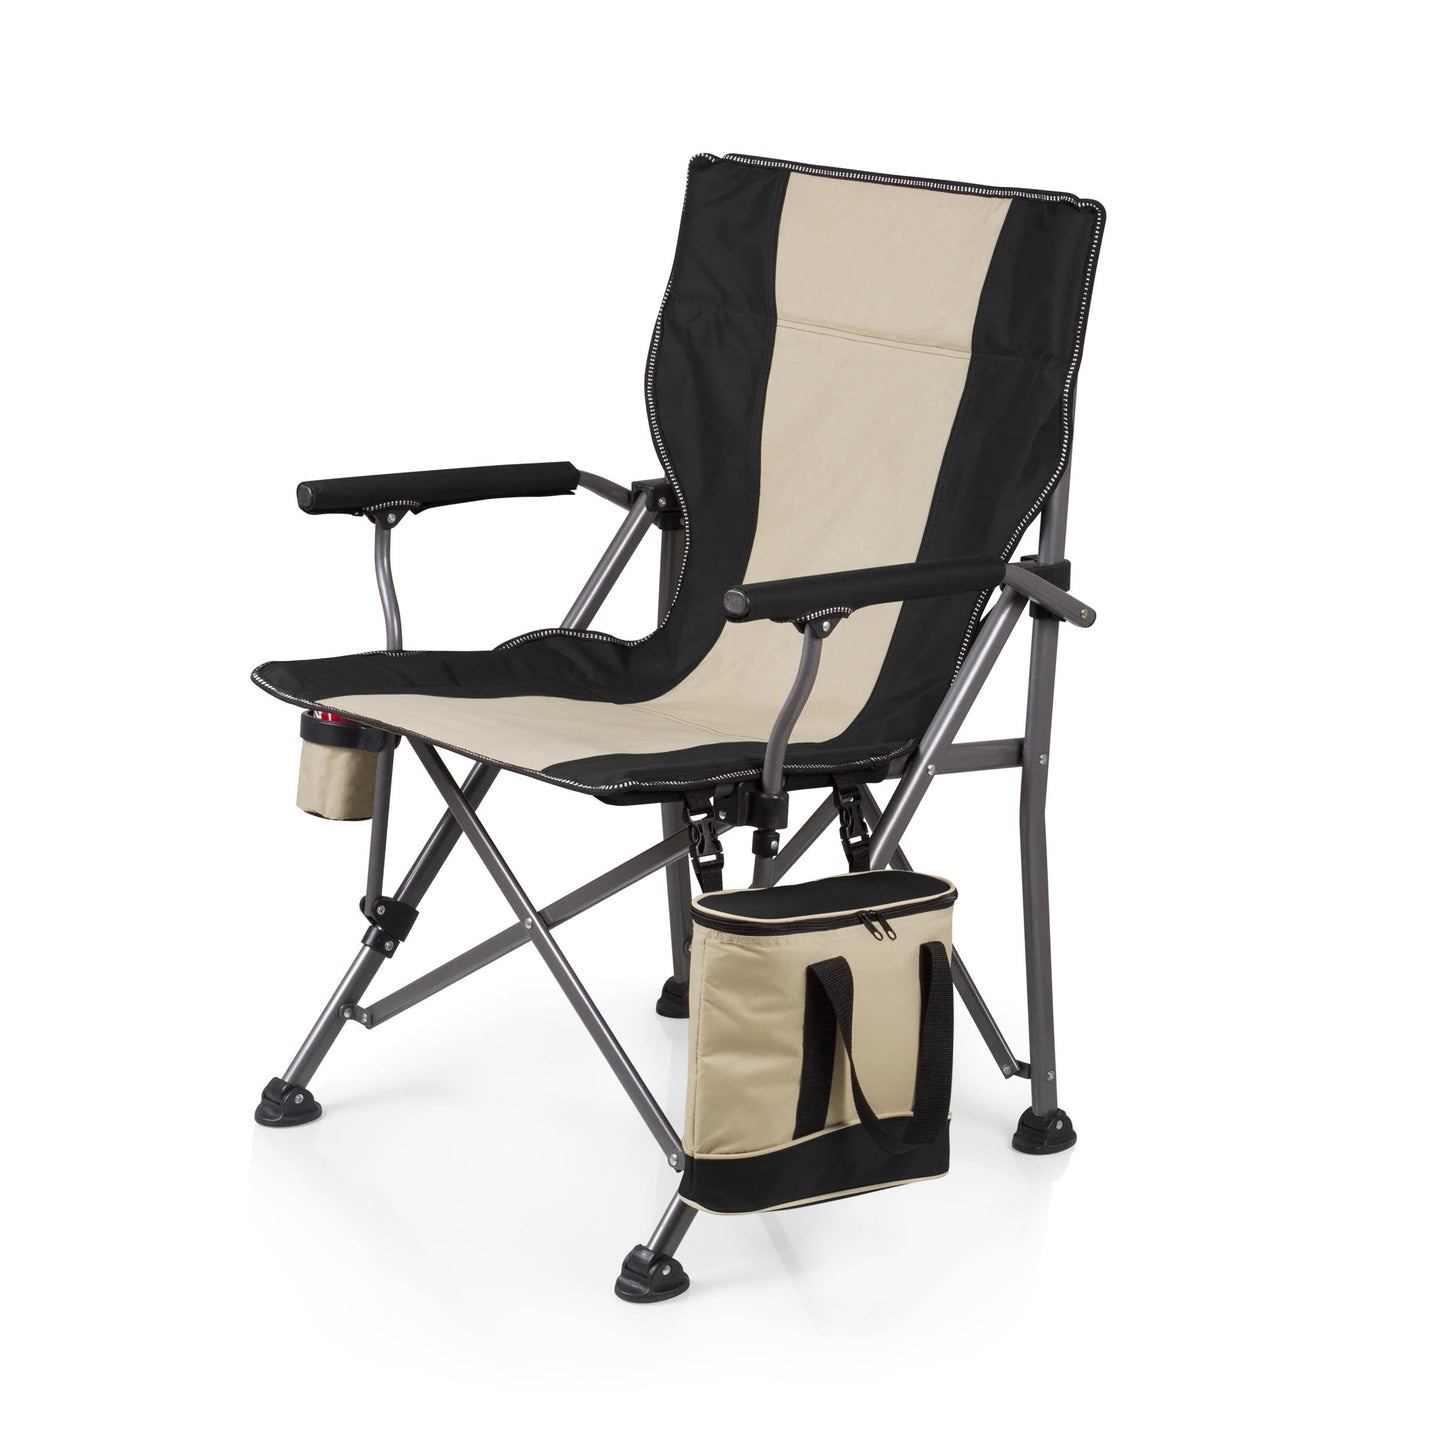 Miami Dolphins - Outlander Folding Camping Chair with Cooler